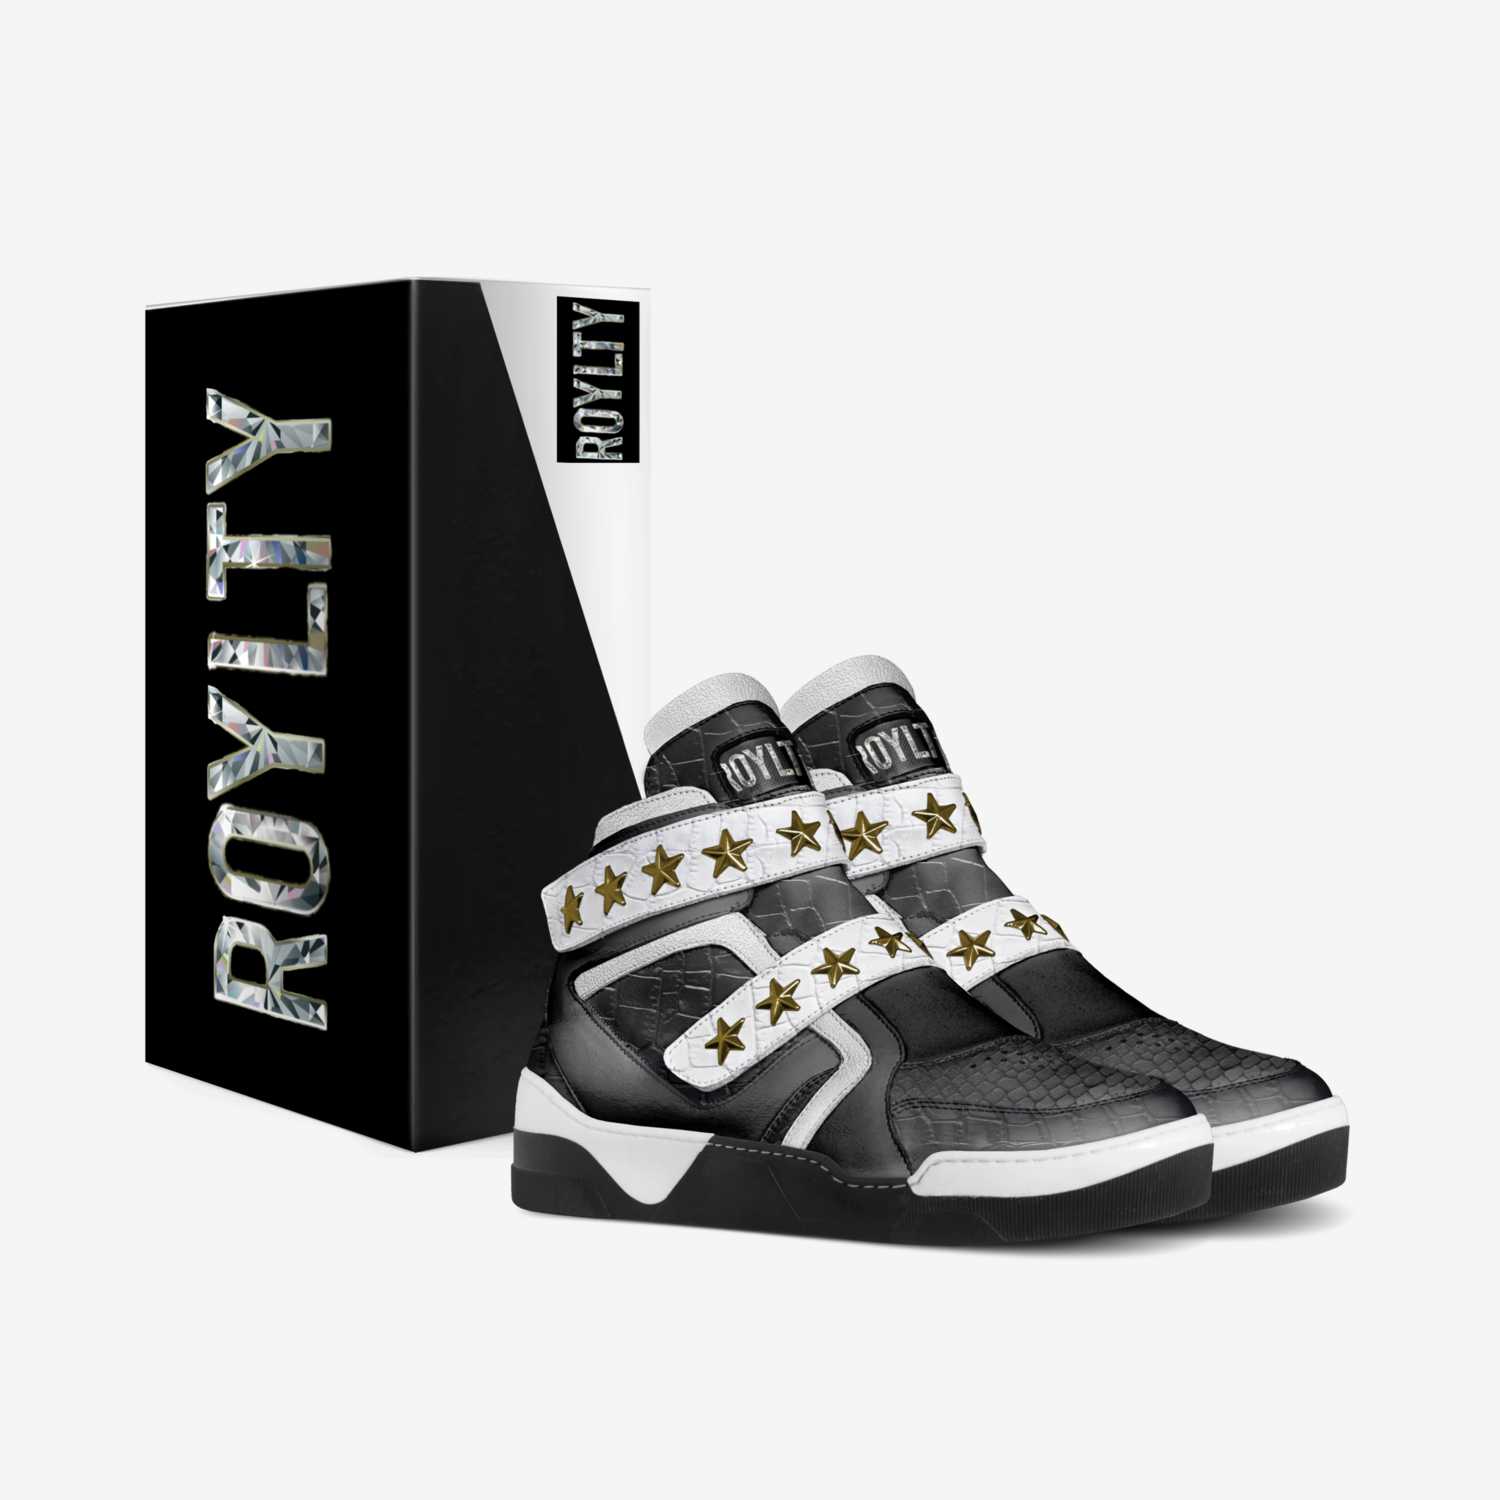 Royal Flush Gang X custom made in Italy shoes by Parris Gardner | Box view